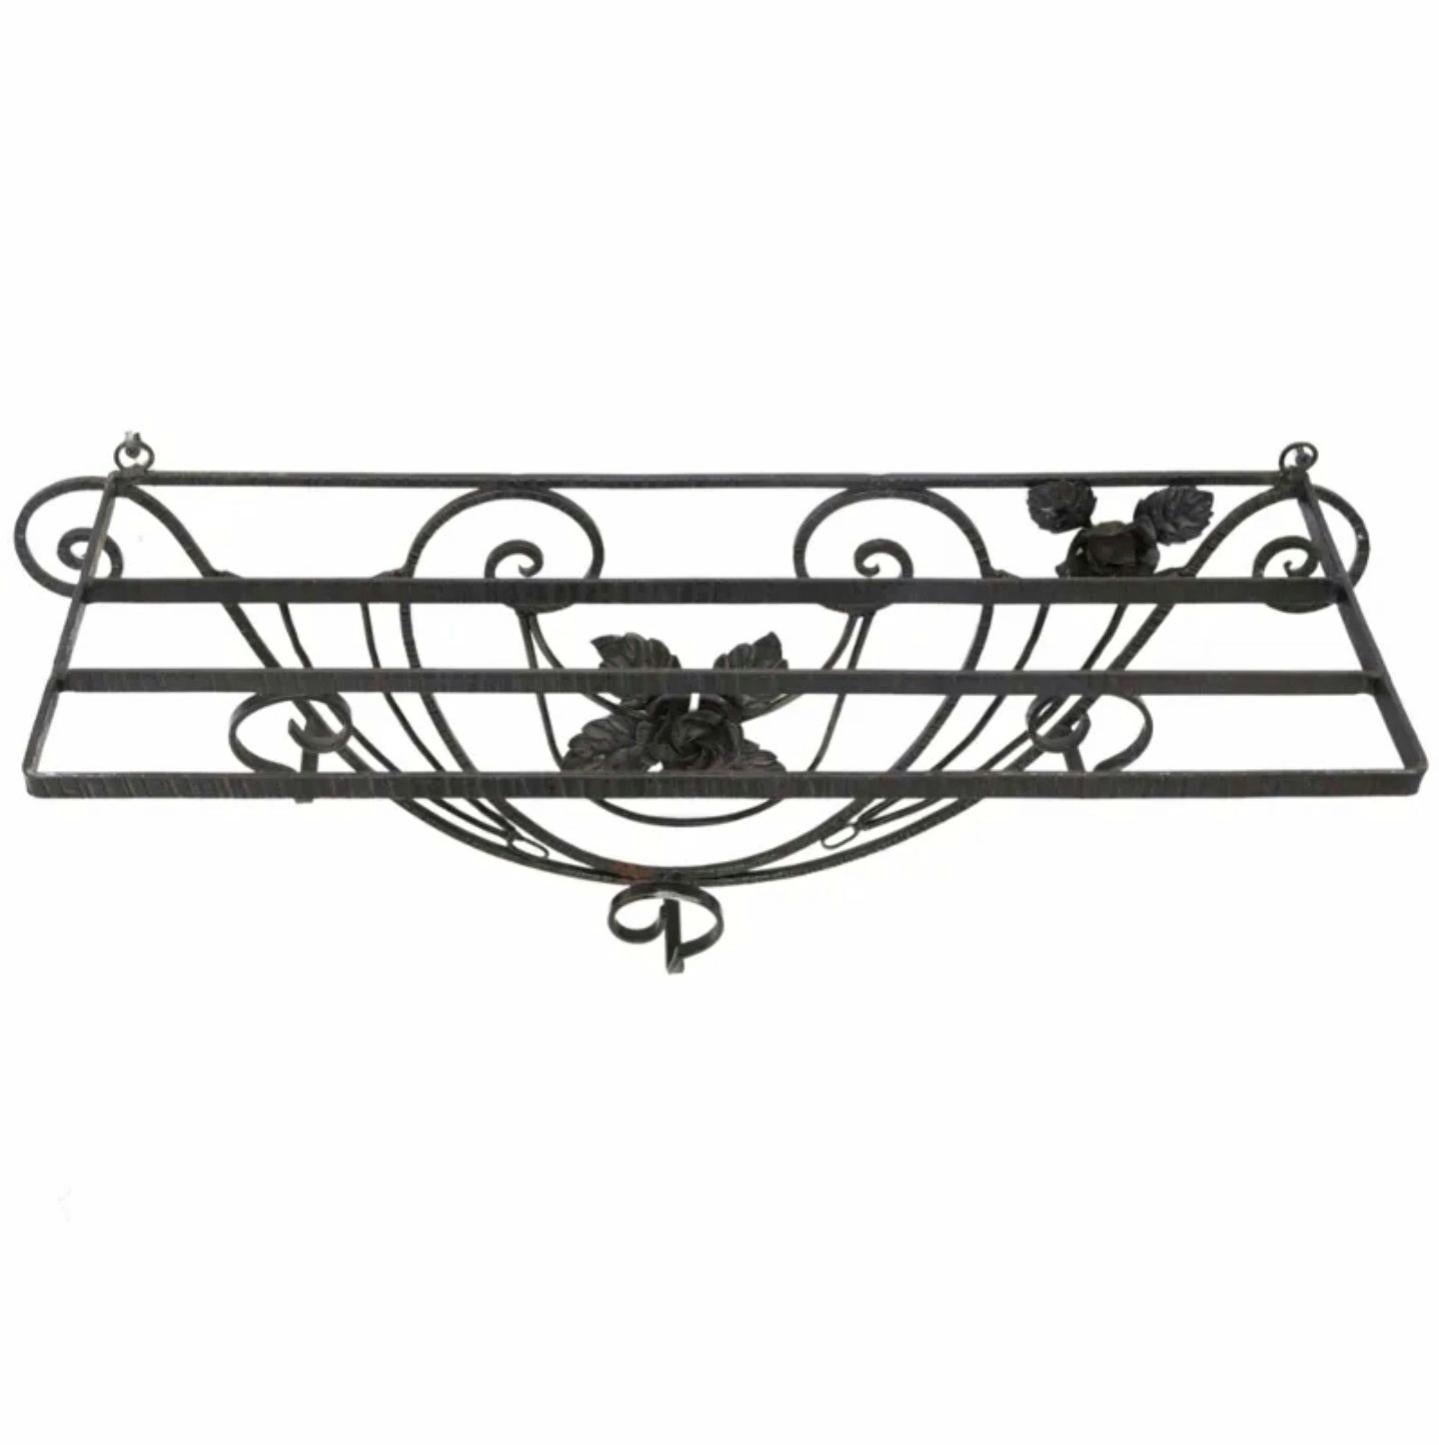 Forged French Art Deco Wrought Iron Wall Hanging Hall Shelf Hat Coat Rack Edgar Brandt For Sale